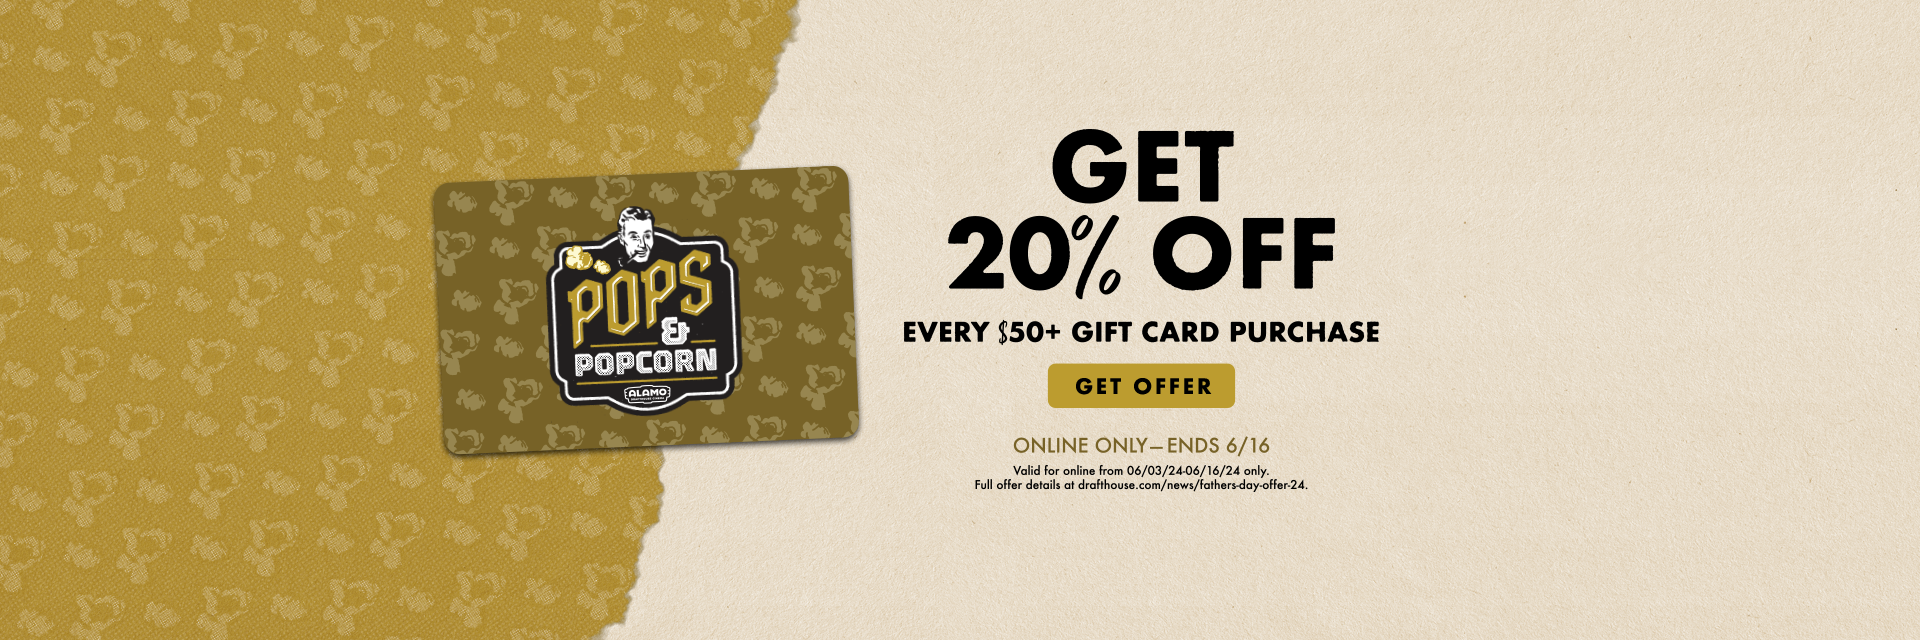 Get 20% off gift card purchases of $50 or more